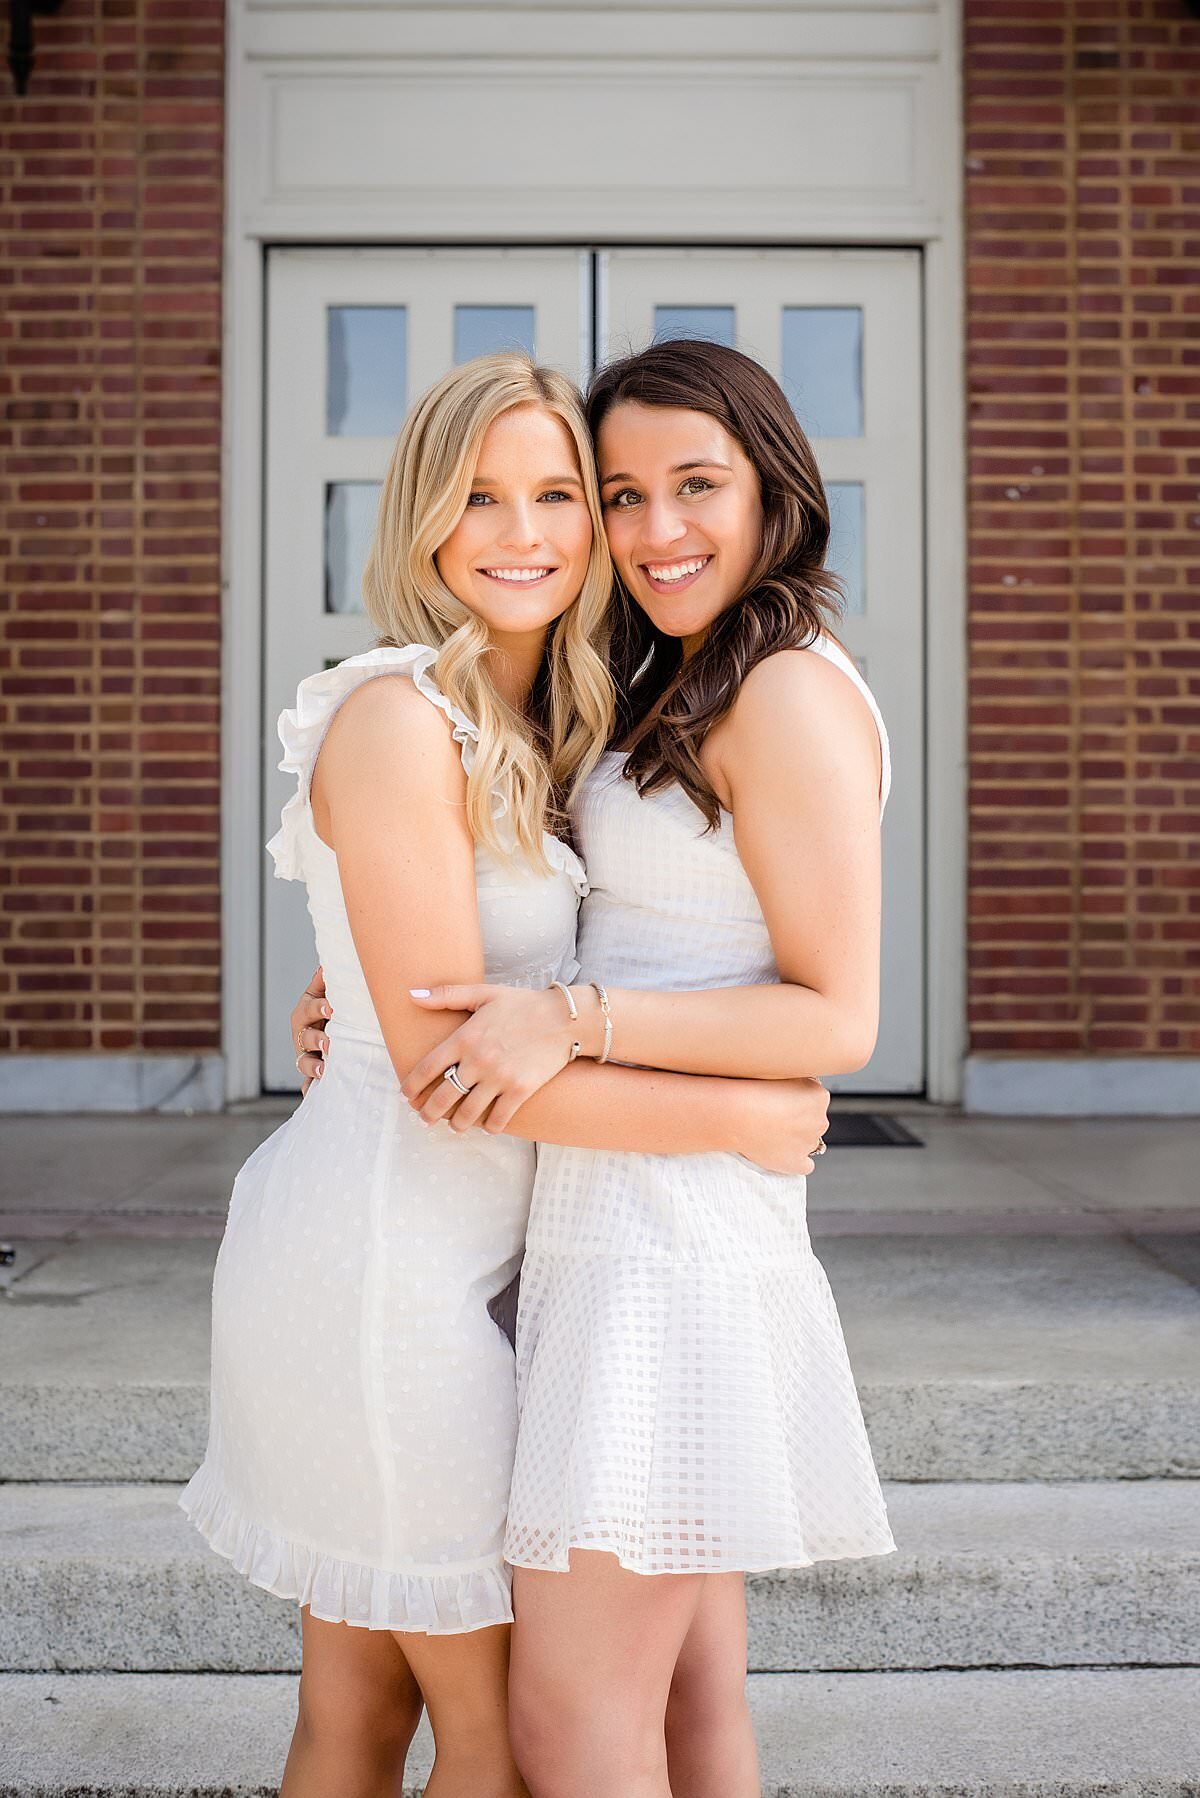 Roommates wearing white dresses and hugging one another on the steps of historic Vanderbilt campus building